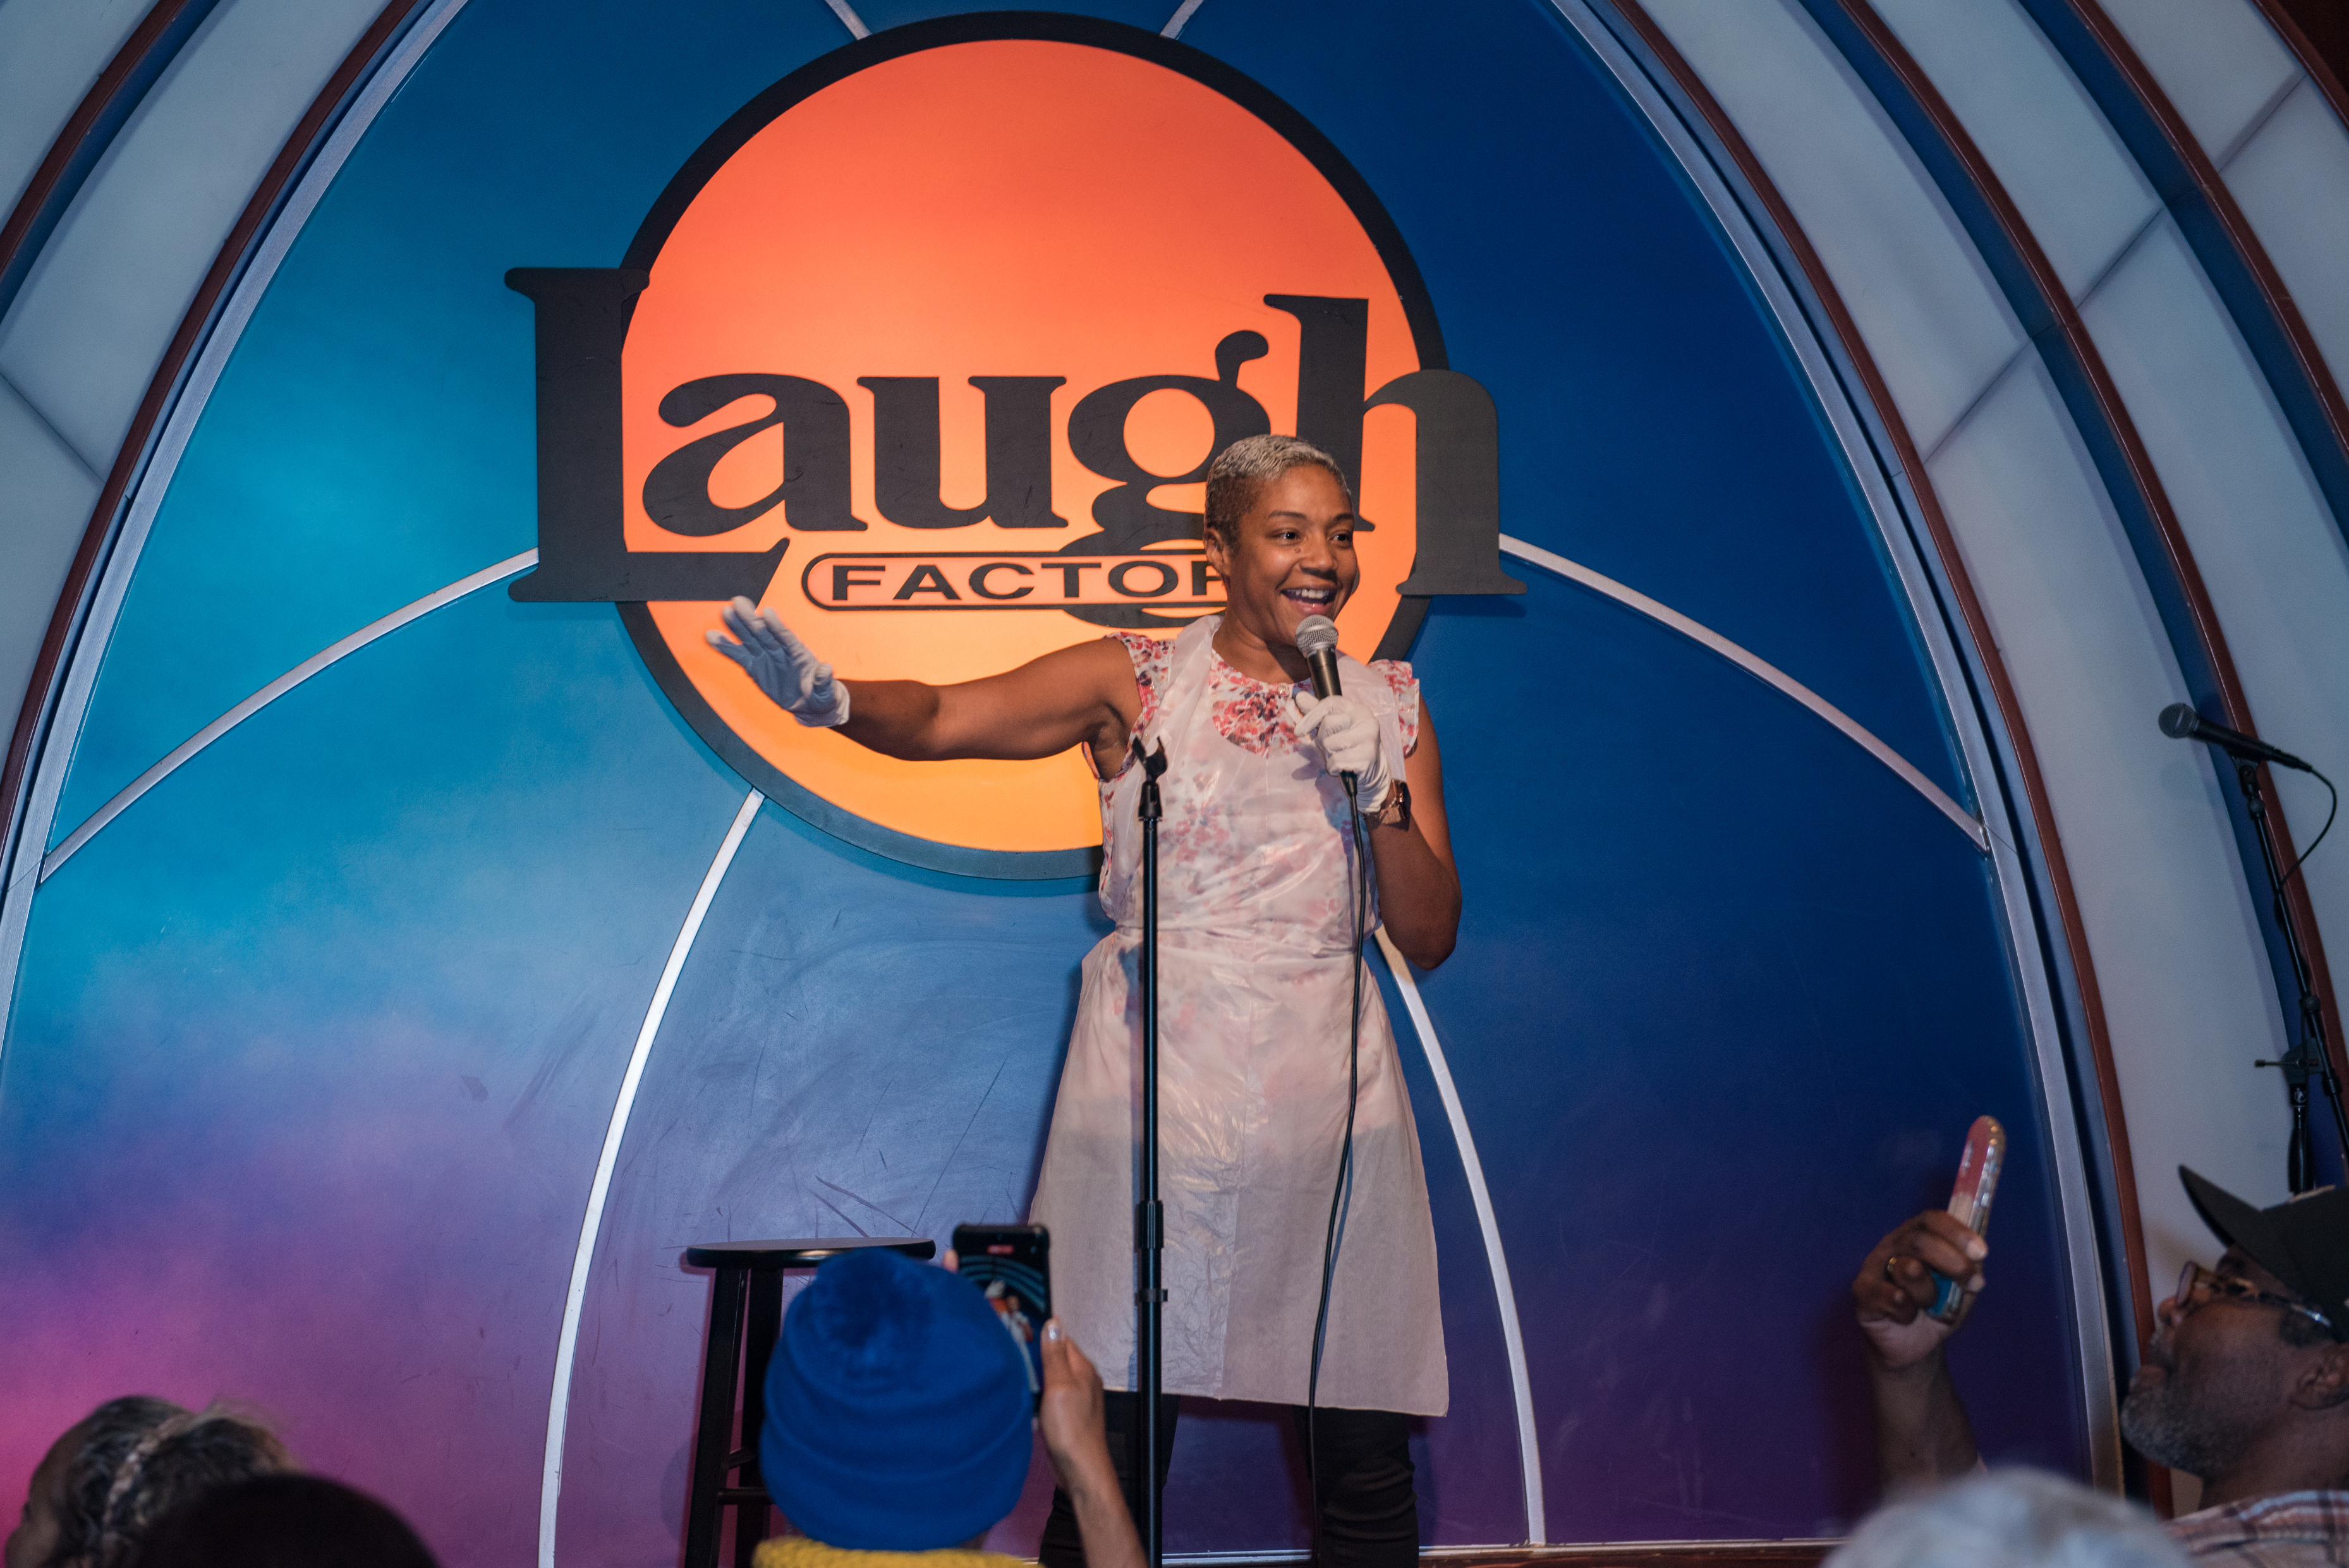 tiffany doing stand up at the laugh factory